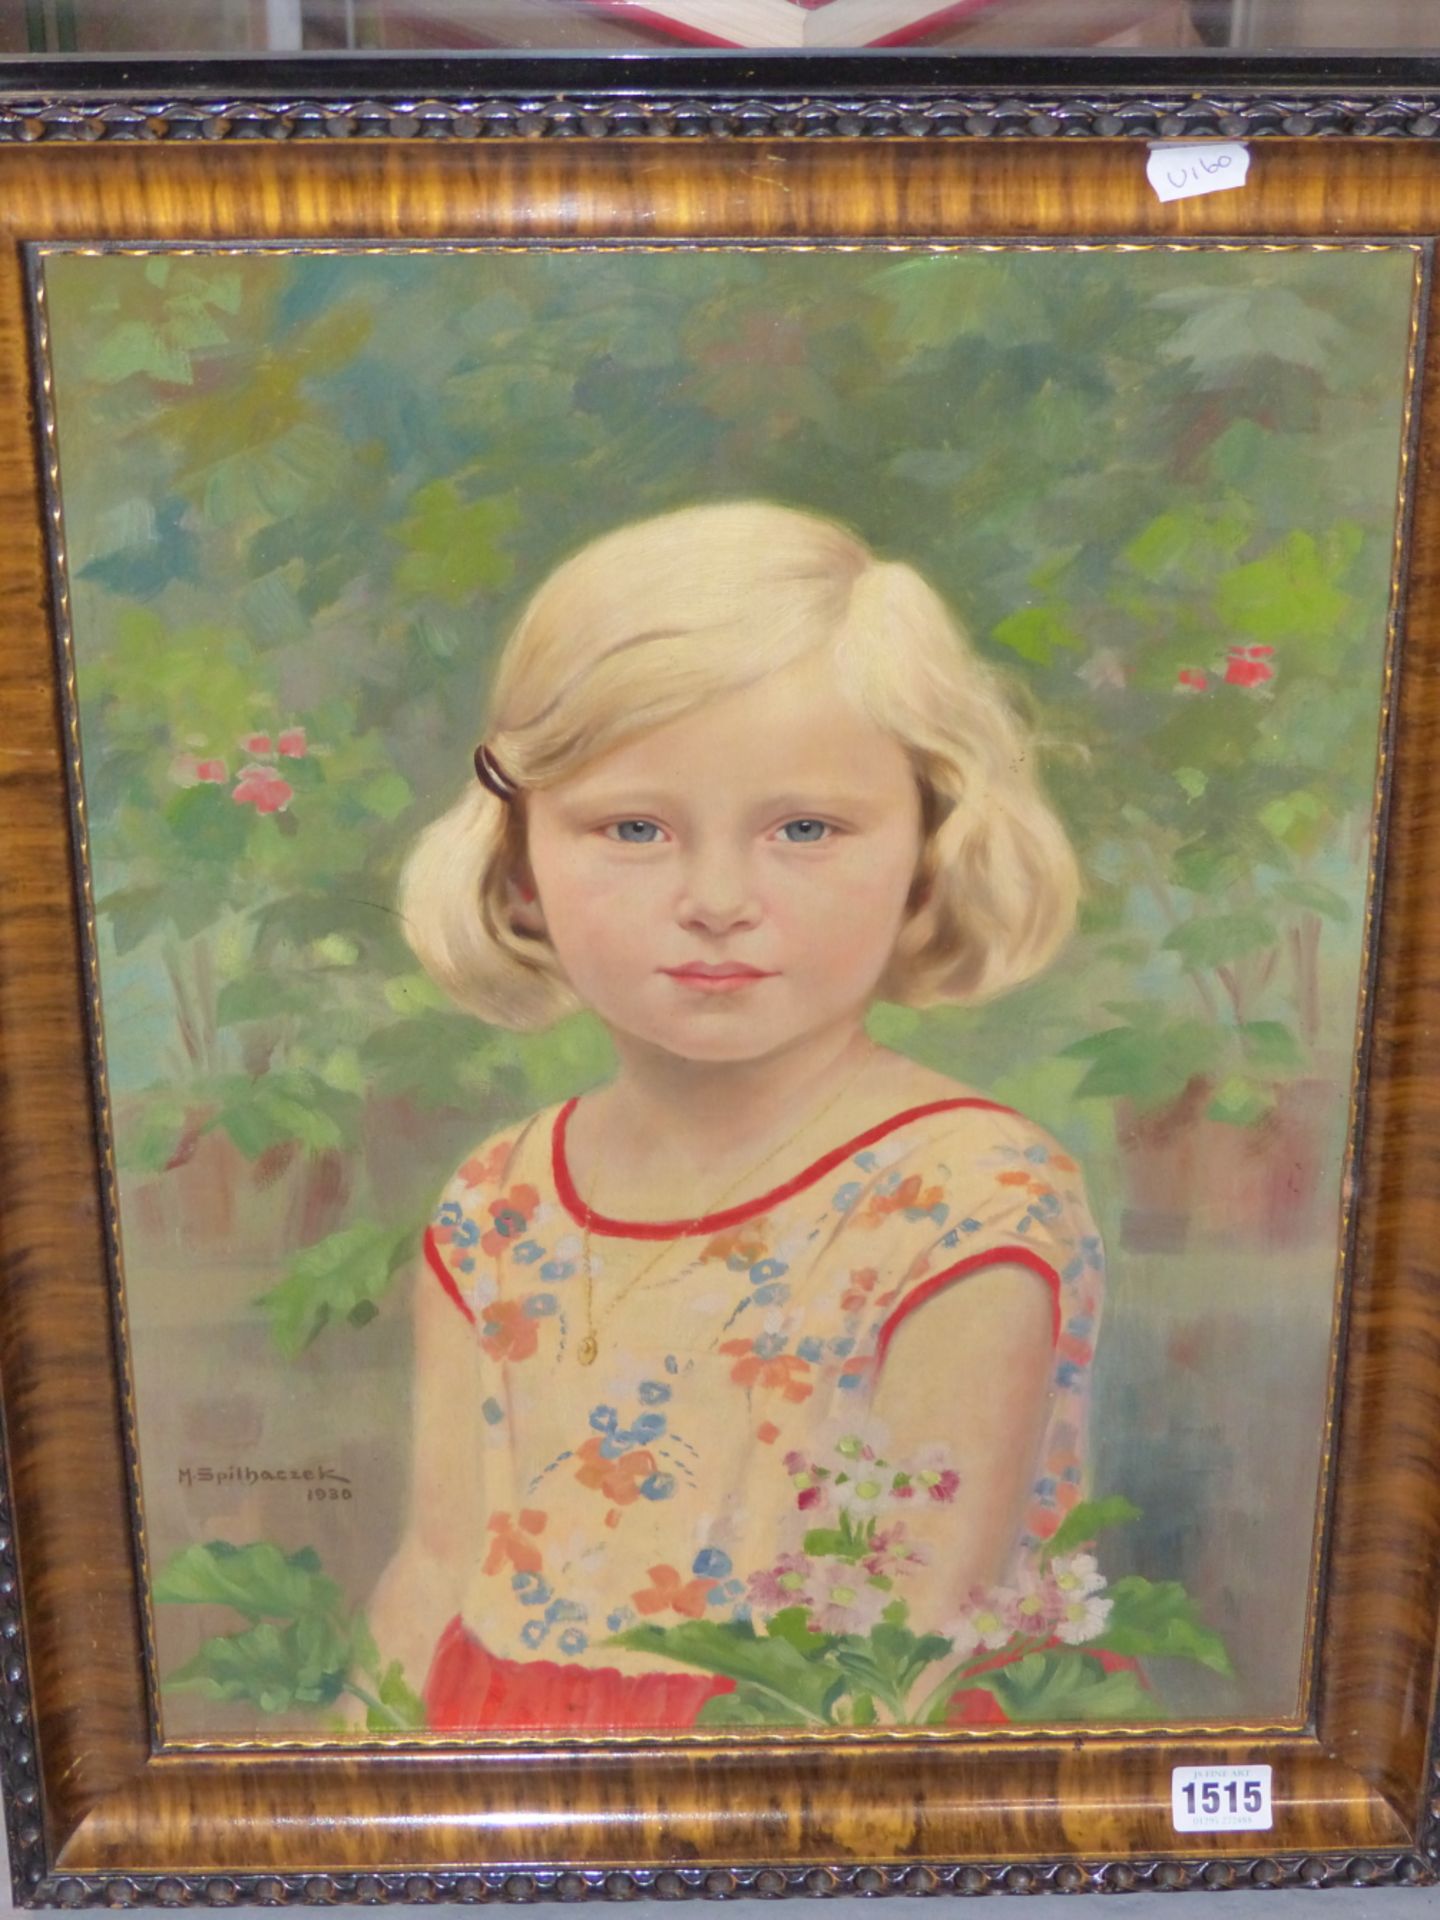 M. SPILHACZEK (1876-1961) ARR. PORTRAIT OF A YOUNG GIRL, SIGNED AND DATED 1930, OIL ON BOARD. 49 x - Image 3 of 8